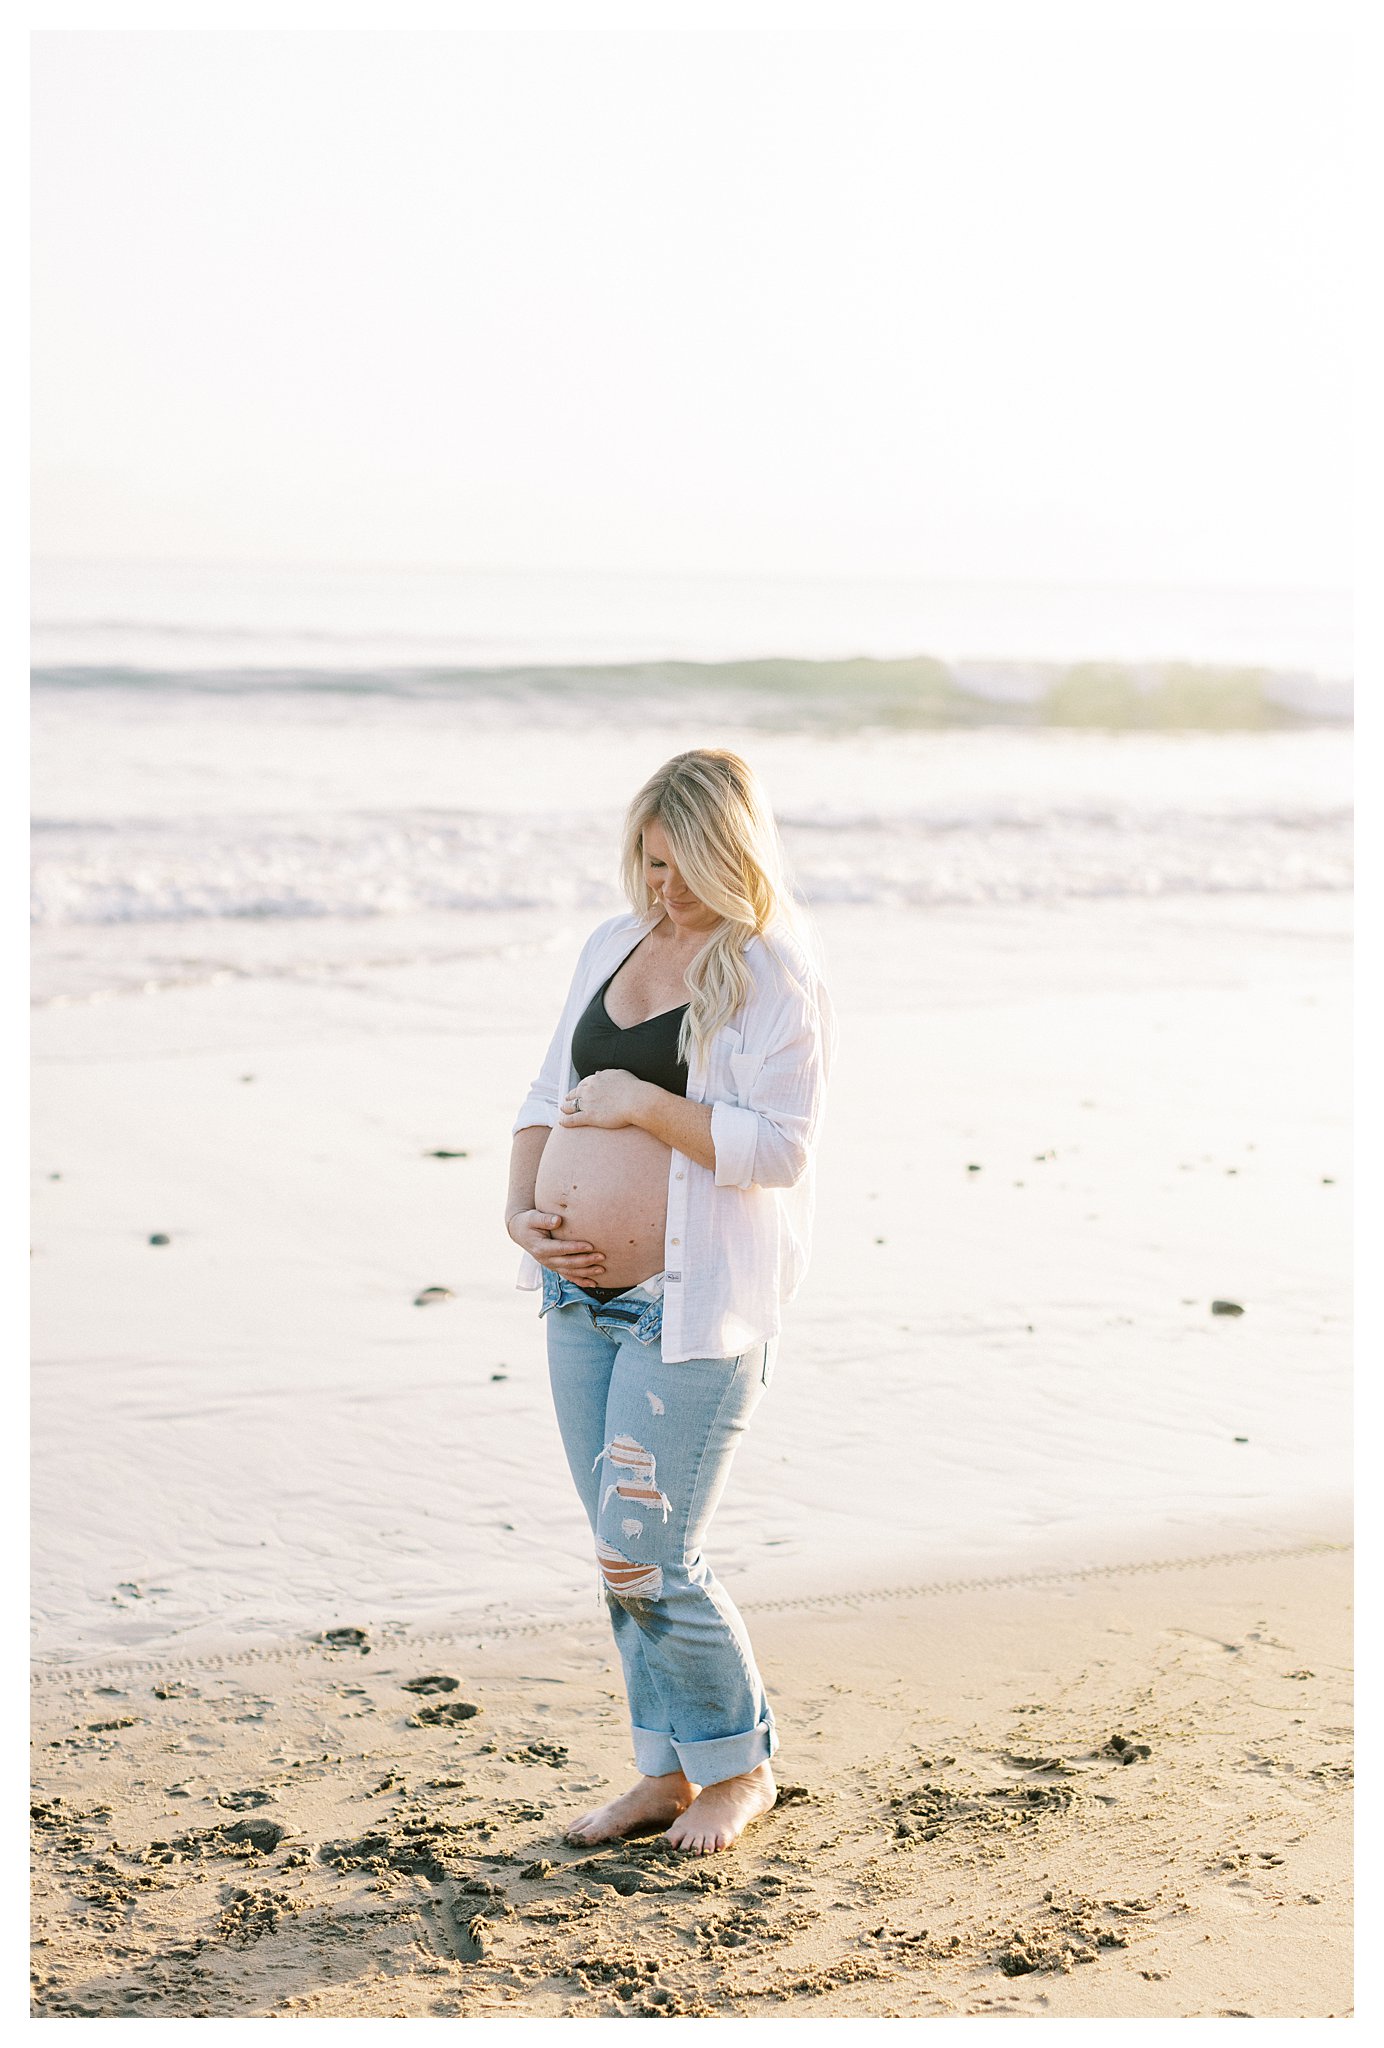 Mom-to-be looks at her pregnant belly in Malibu, Ca.